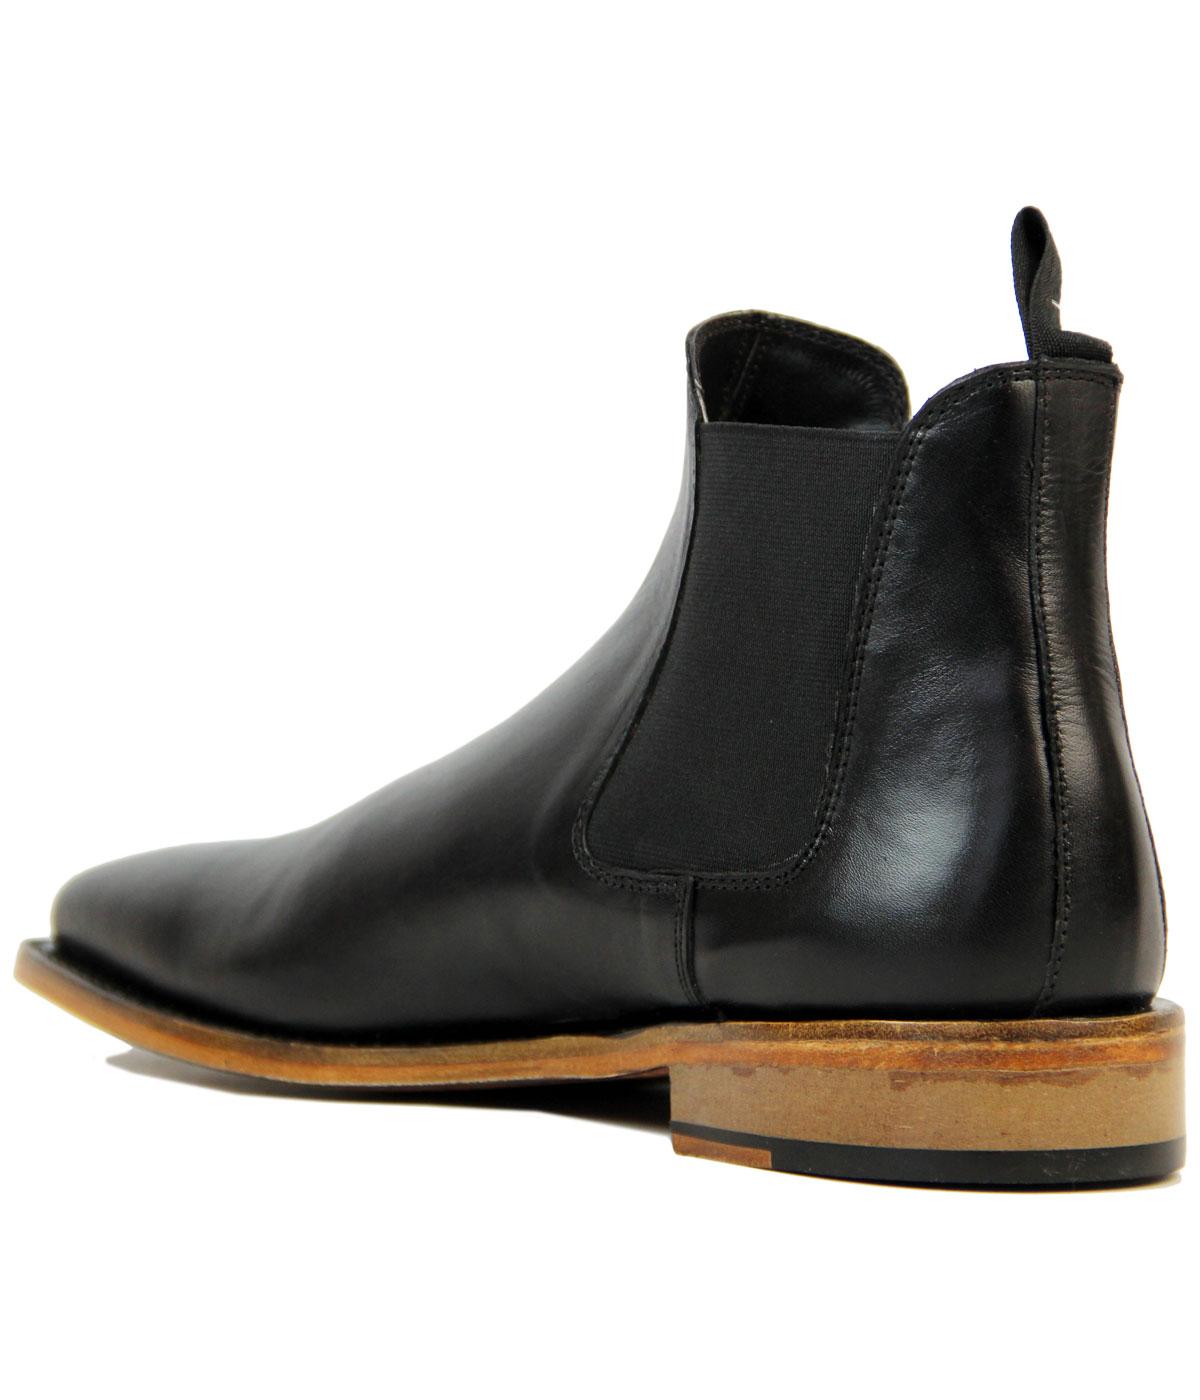 KENSINGTON Retro 1960s Mod Goodyear Welted Chelsea Boots in Black